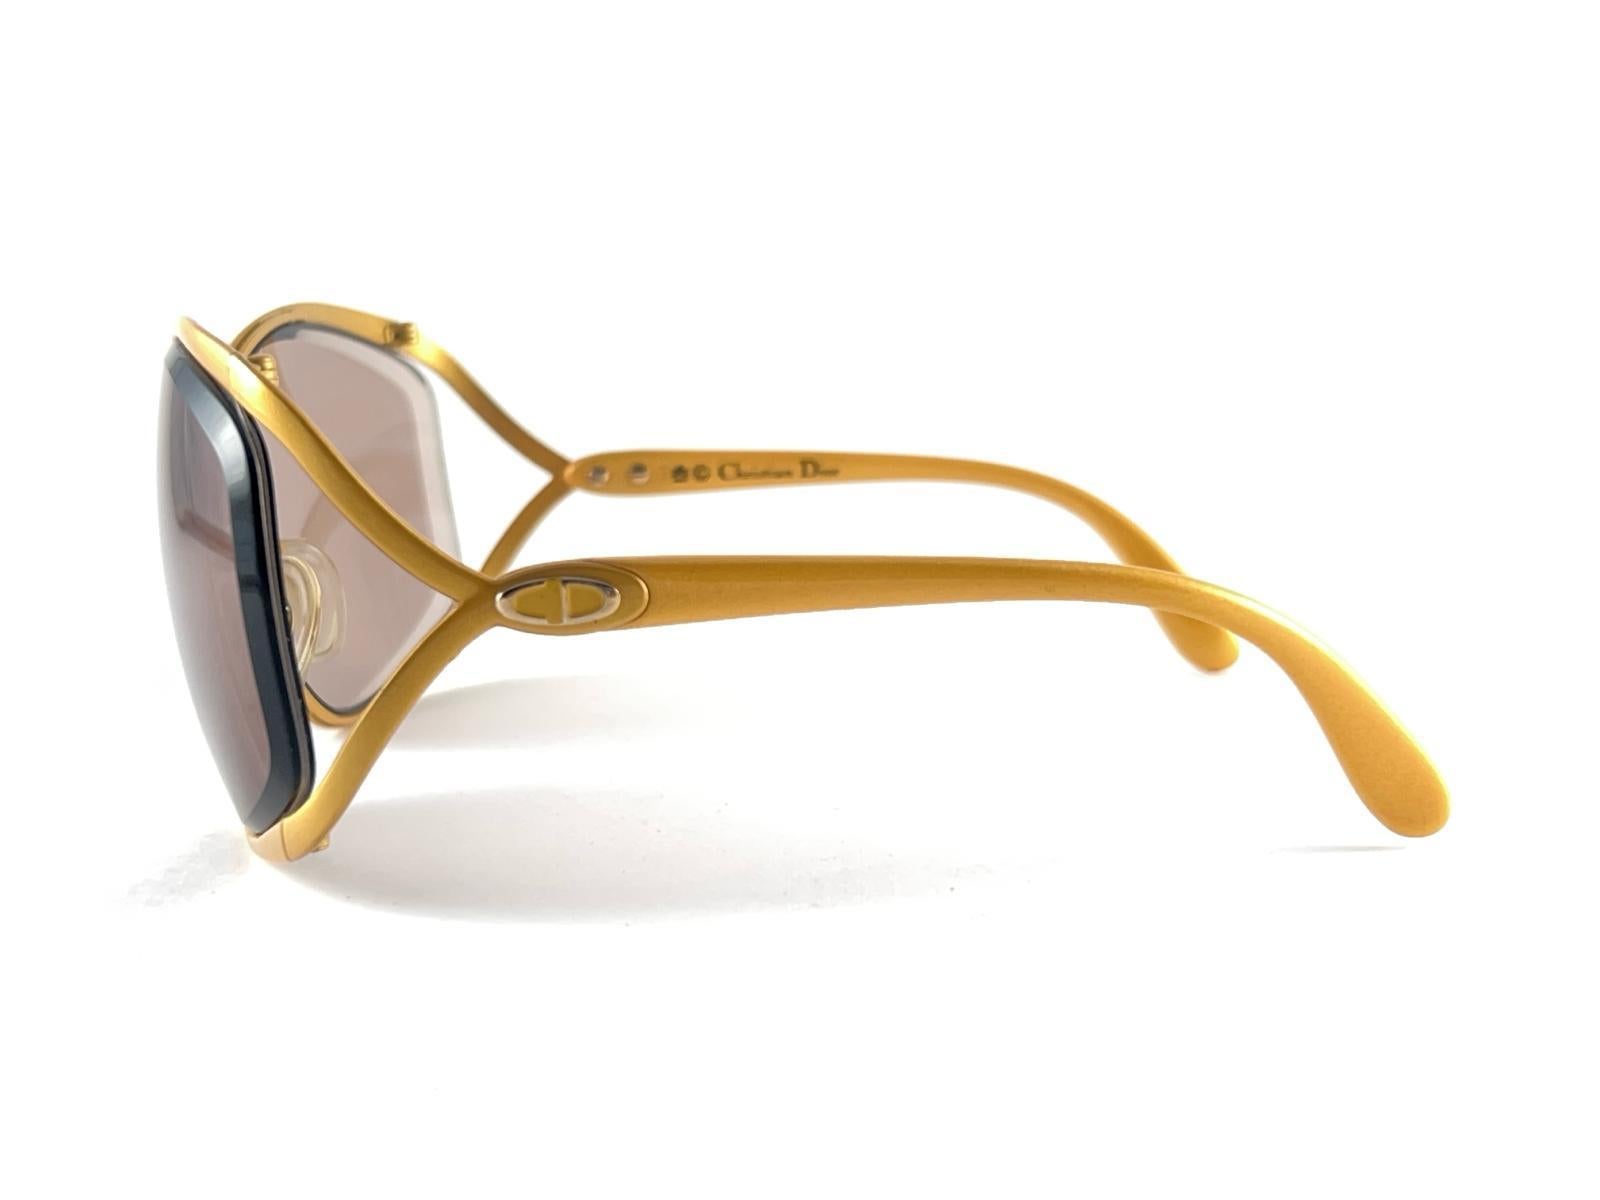 New Vintage Christian Dior 2056 40 Butterfly Mustard Sunglasses Made in Germany For Sale 2